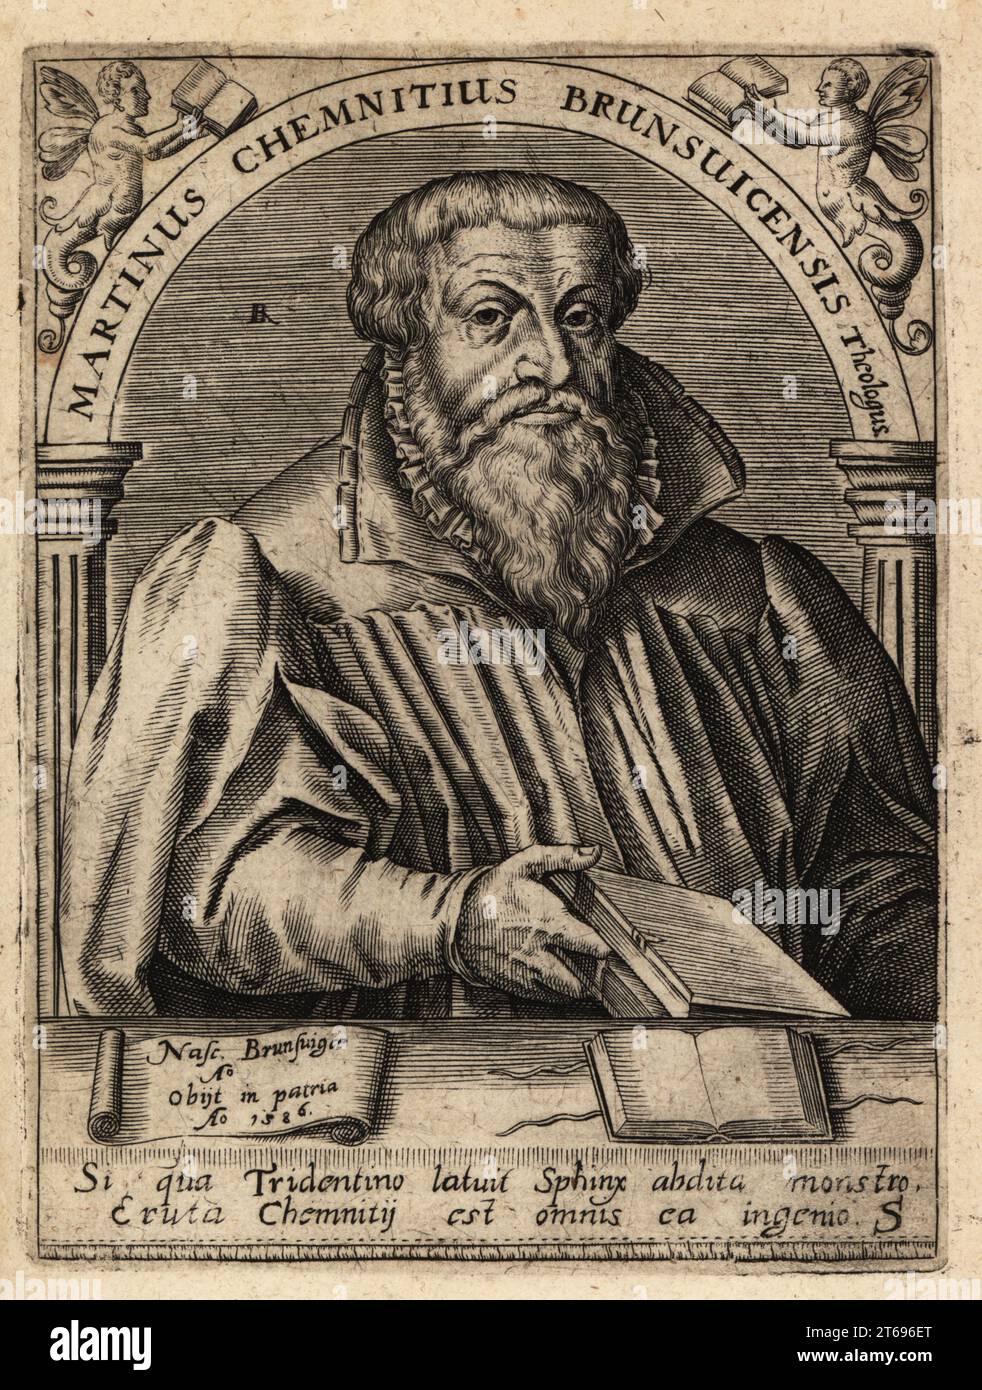 Martin Chemnitz, 1522-1586, German Evangelical Lutheran, Christian theologian, Protestant reformer, churchman and confessor. Martinus Chemnitius Brunsuicensis Theologus. Copperplate engraving by Johann Theodore de Bry from Jean-Jacques Boissards Bibliotheca Chalcographica, Johann Ammonius, Frankfurt, 1650. Stock Photo